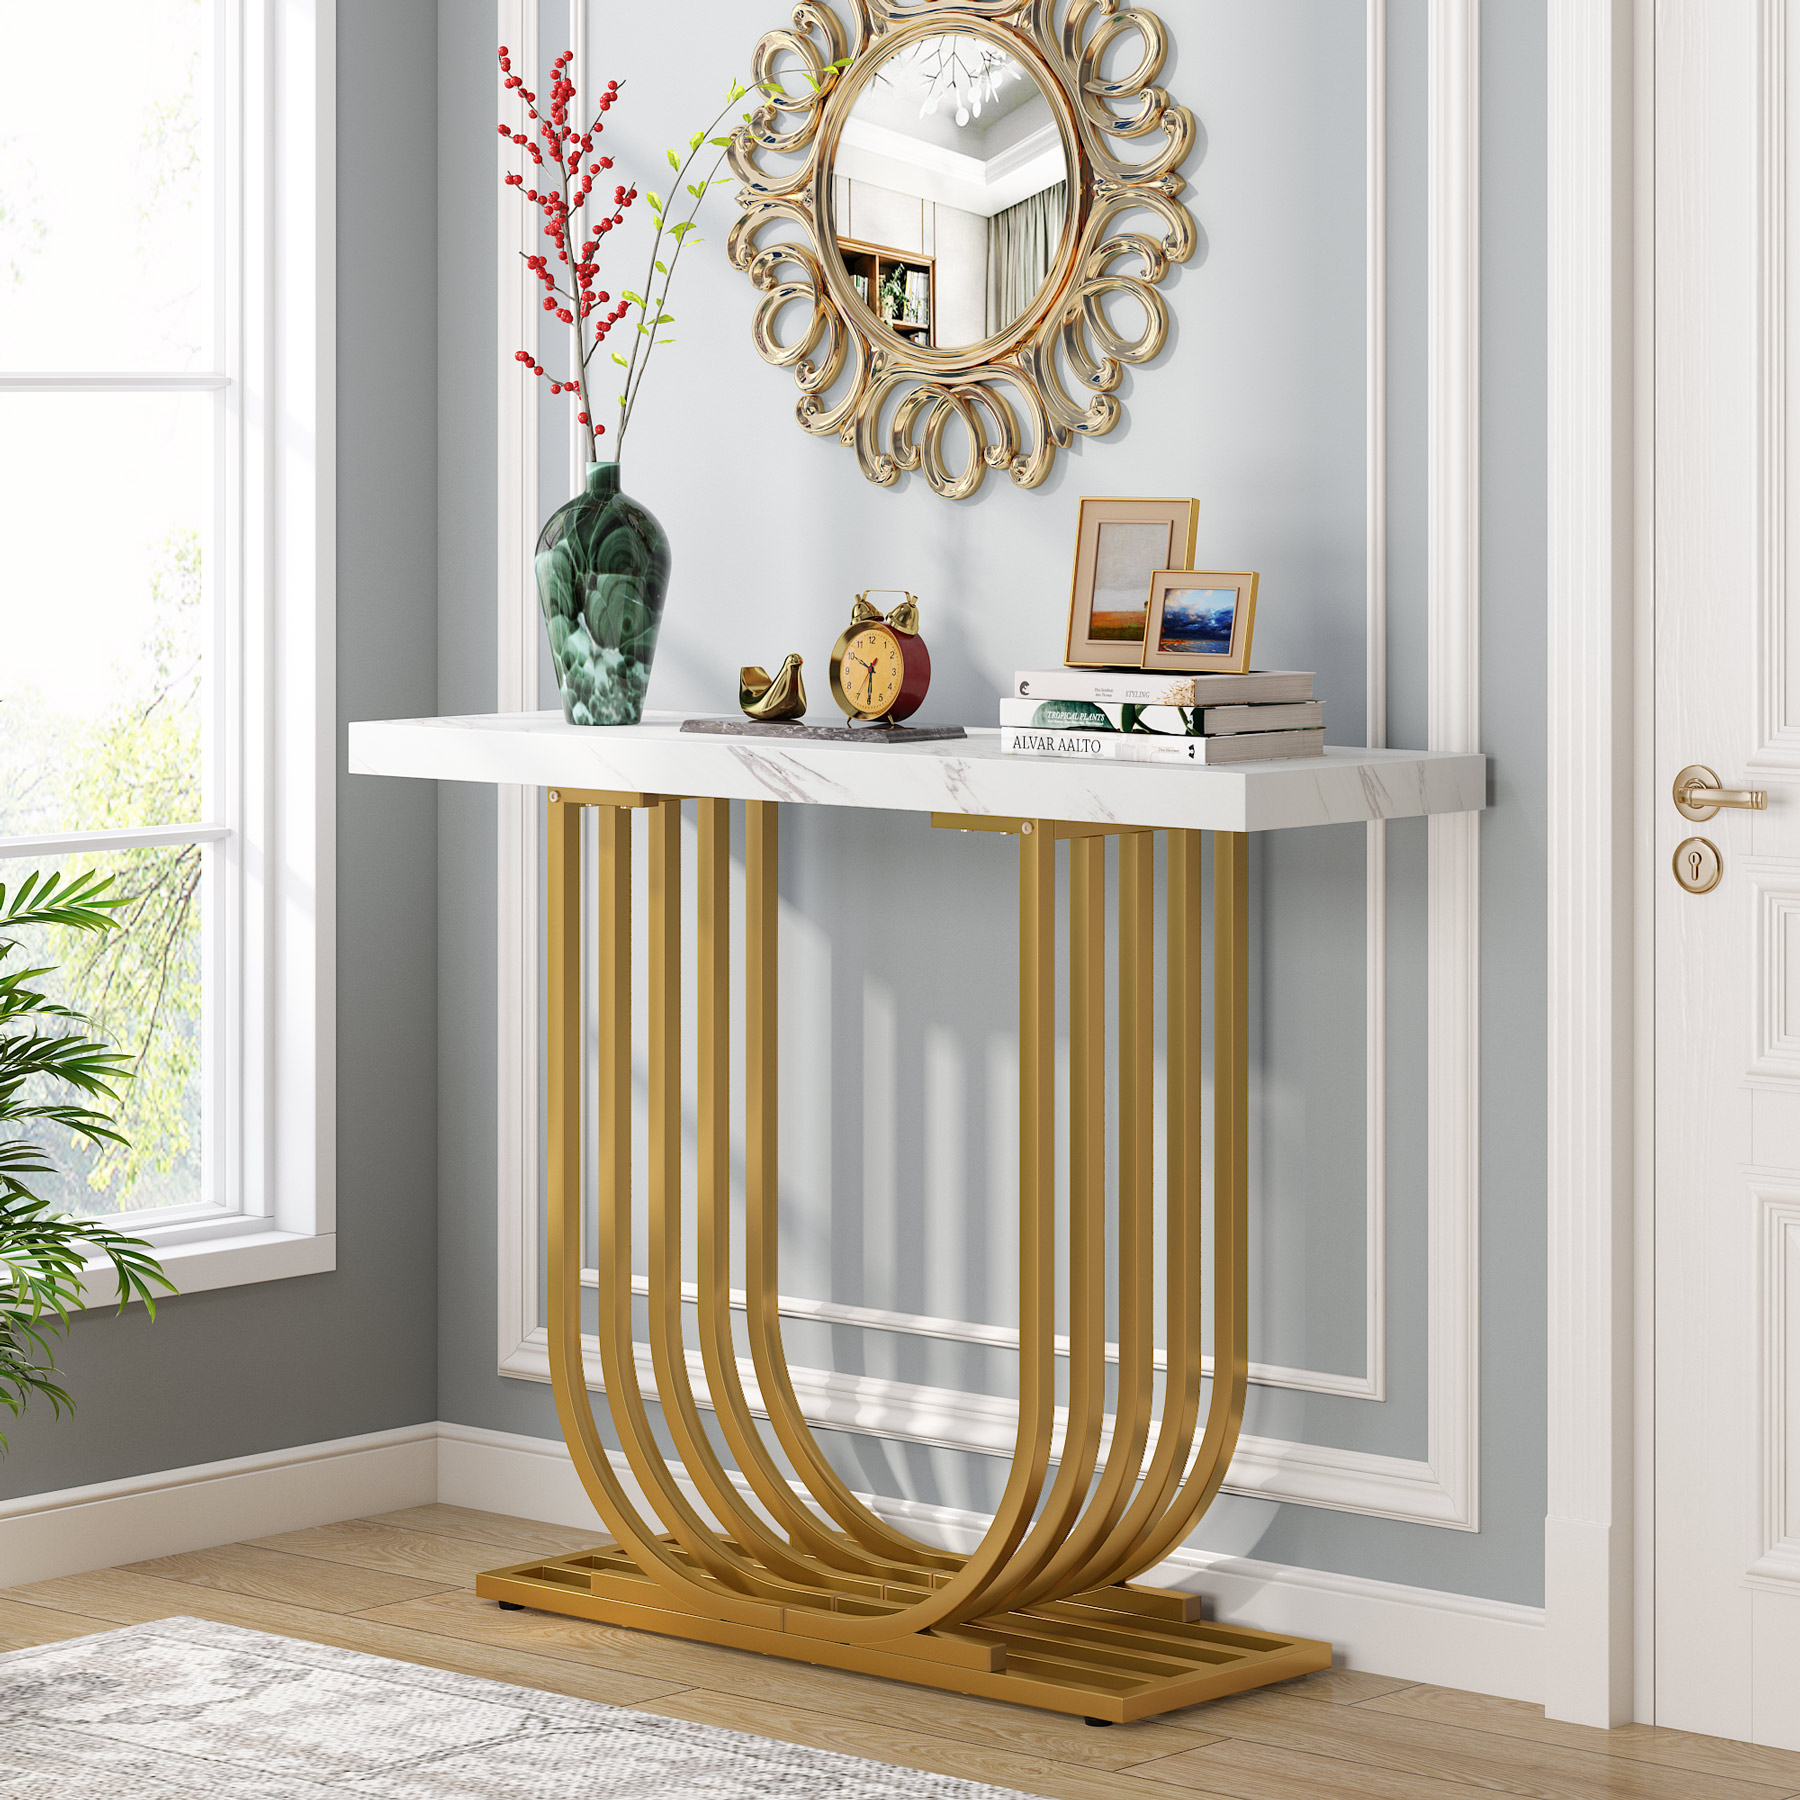 Tribesigns Modern Console Table, 40 Inch Modern Faux Marble Entryway Table with Gold Base, Narrow Accent Sofa Table with Geometric Metal Legs for Living Room, Hallway, Entrance, White & Gold - image 2 of 5